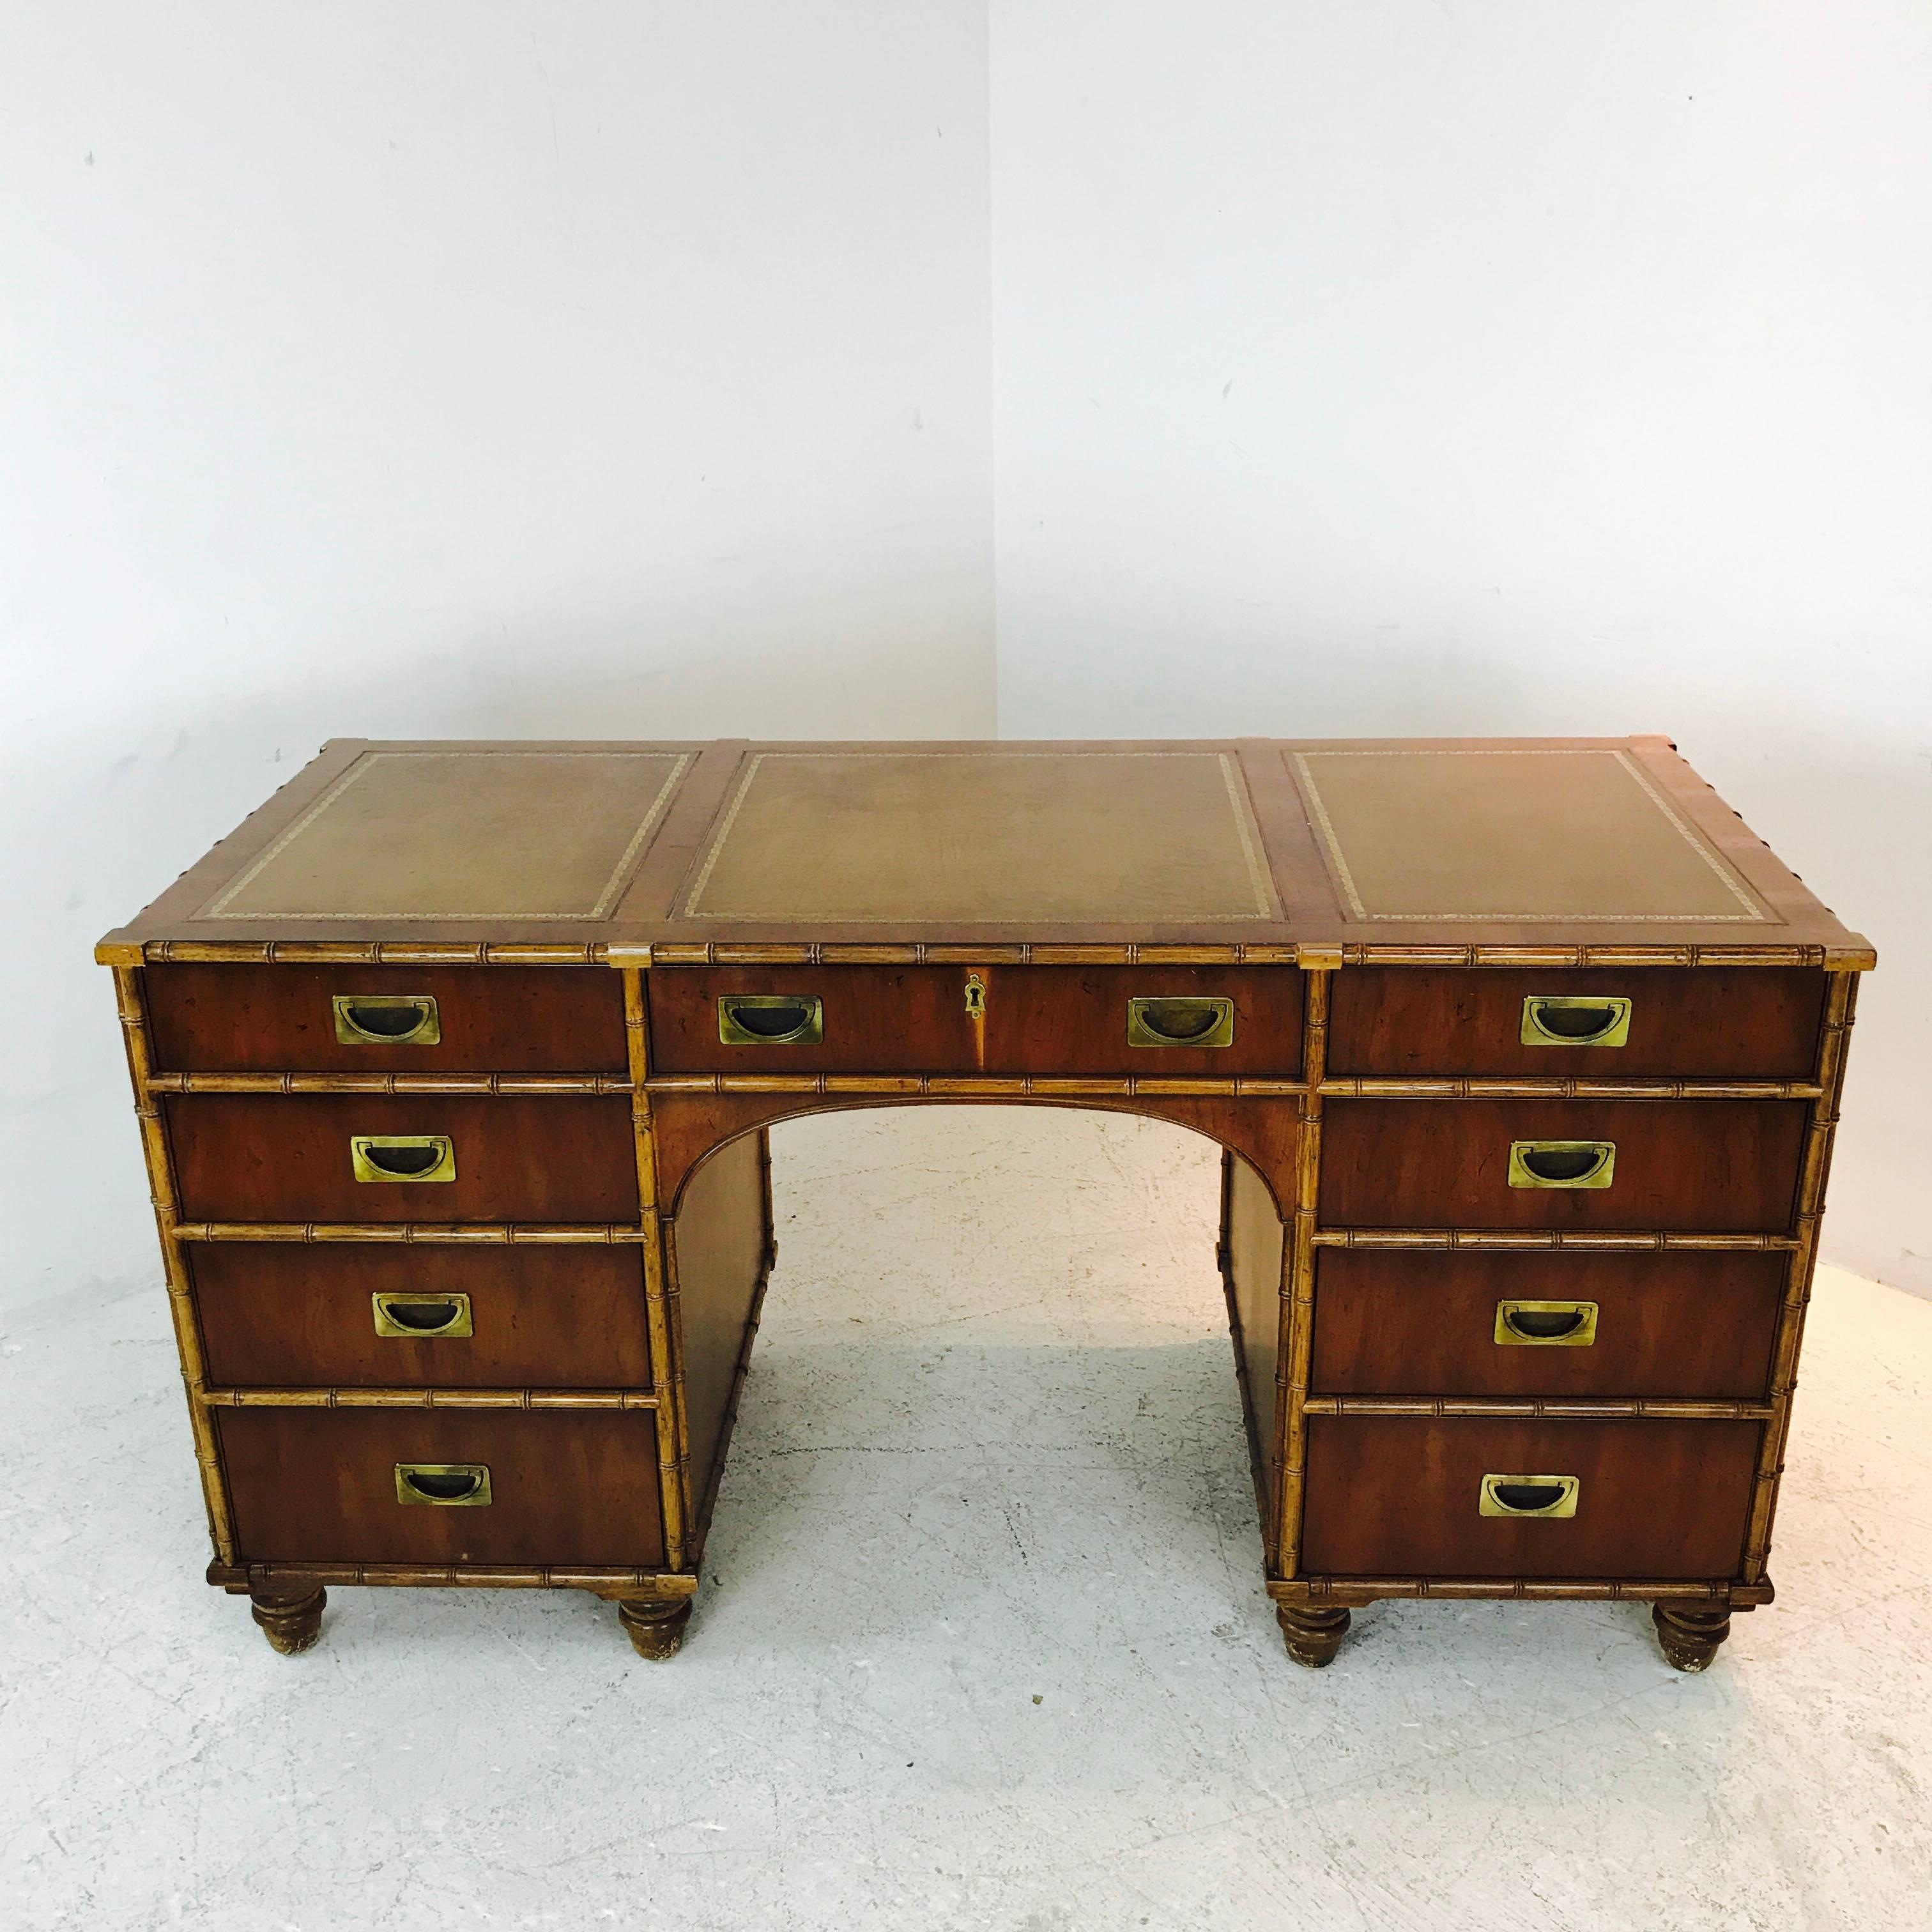 Henredon faux bamboo desk with inlaid leather top. In good vintage condition with visible wear from age and use, circa 1960s

dimensions:
60" W x 30" D x 29" T.